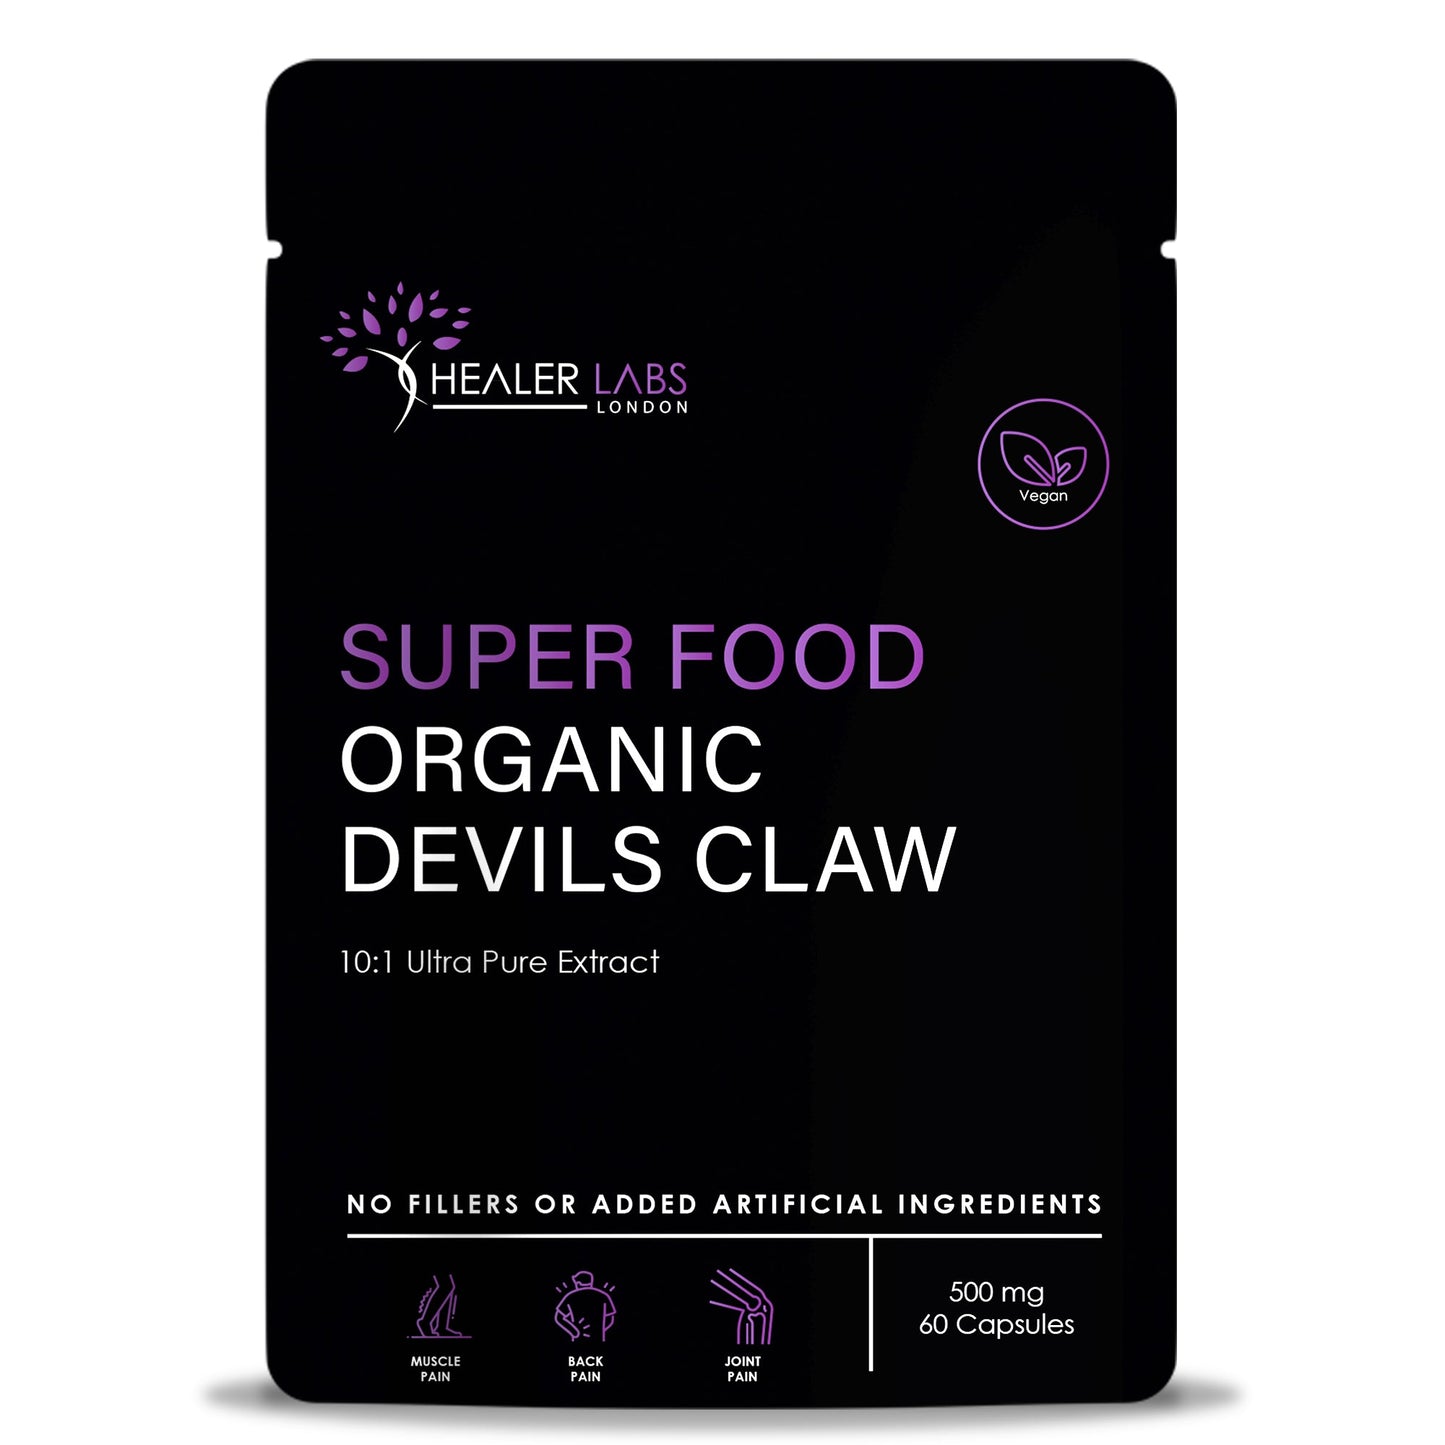  Healer Labs - Devils Claw 10:1 Extract 60 Capsules - The Beauty Corp.